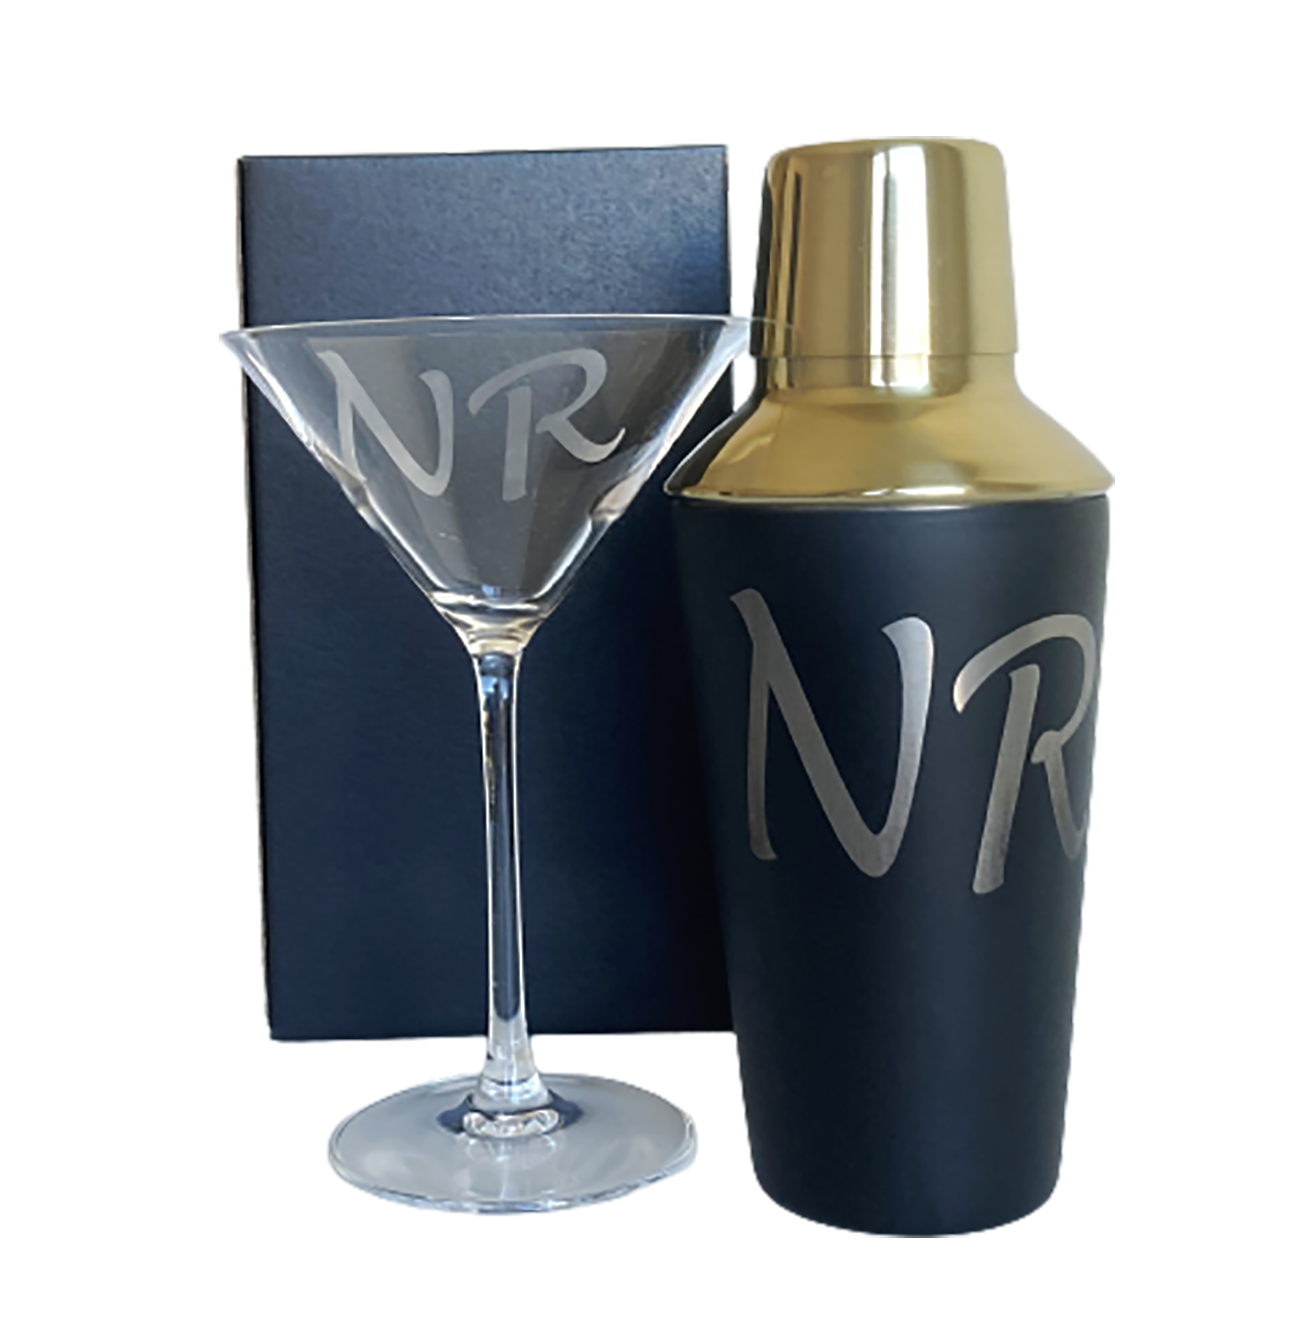 syreindhold Kvittering mandat Personalized Cocktail Shaker and Cocktail glass – aartsengravery